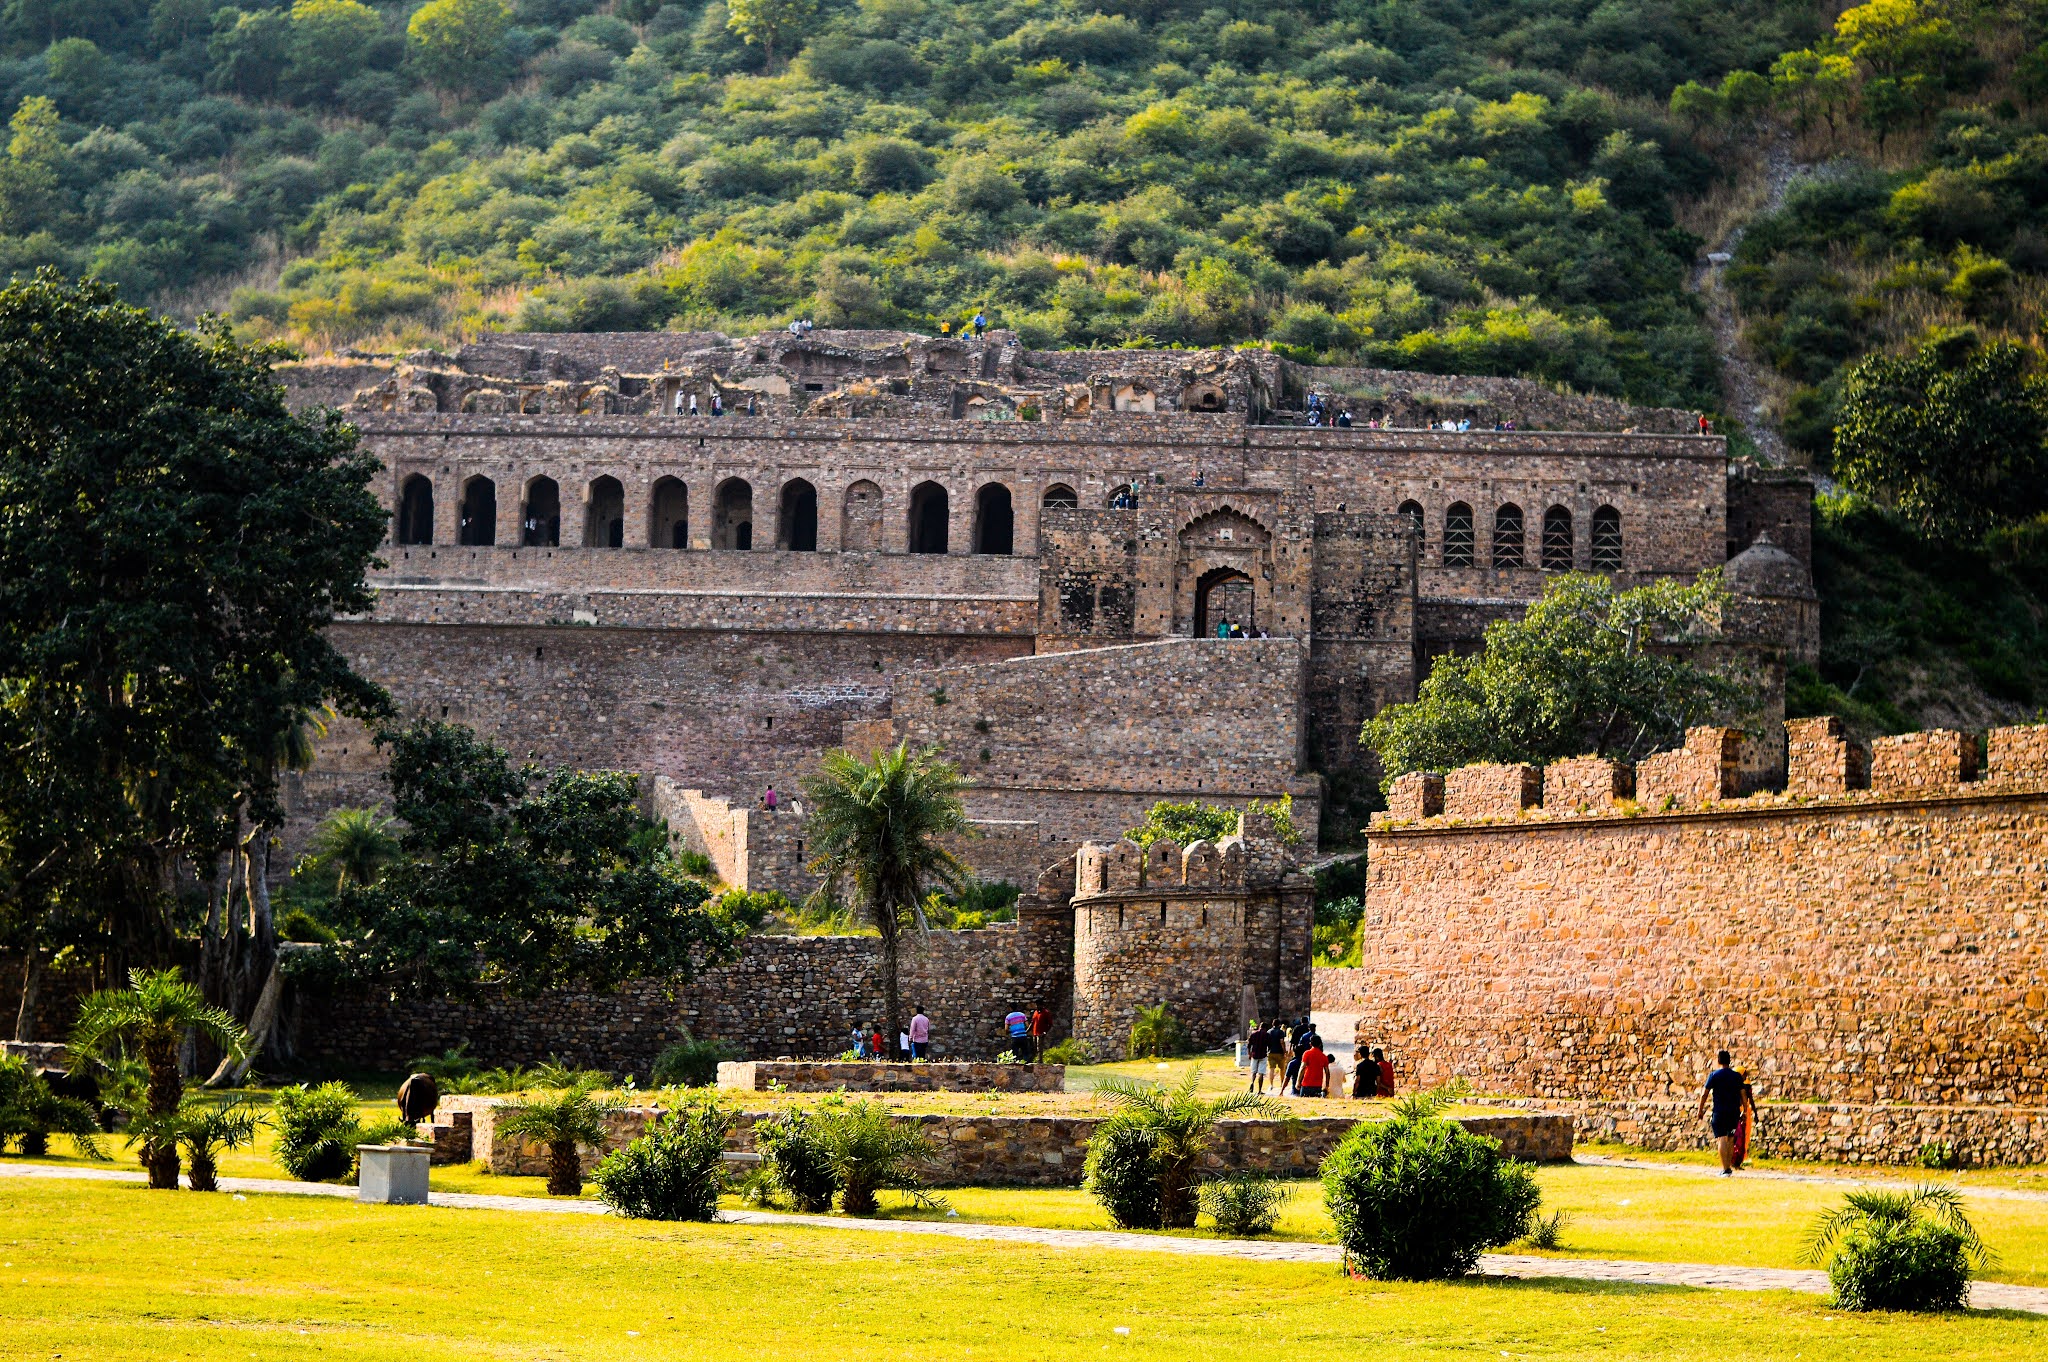 BHANGARH FORT: THE MOST HAUNTED PLACE IN INDIA